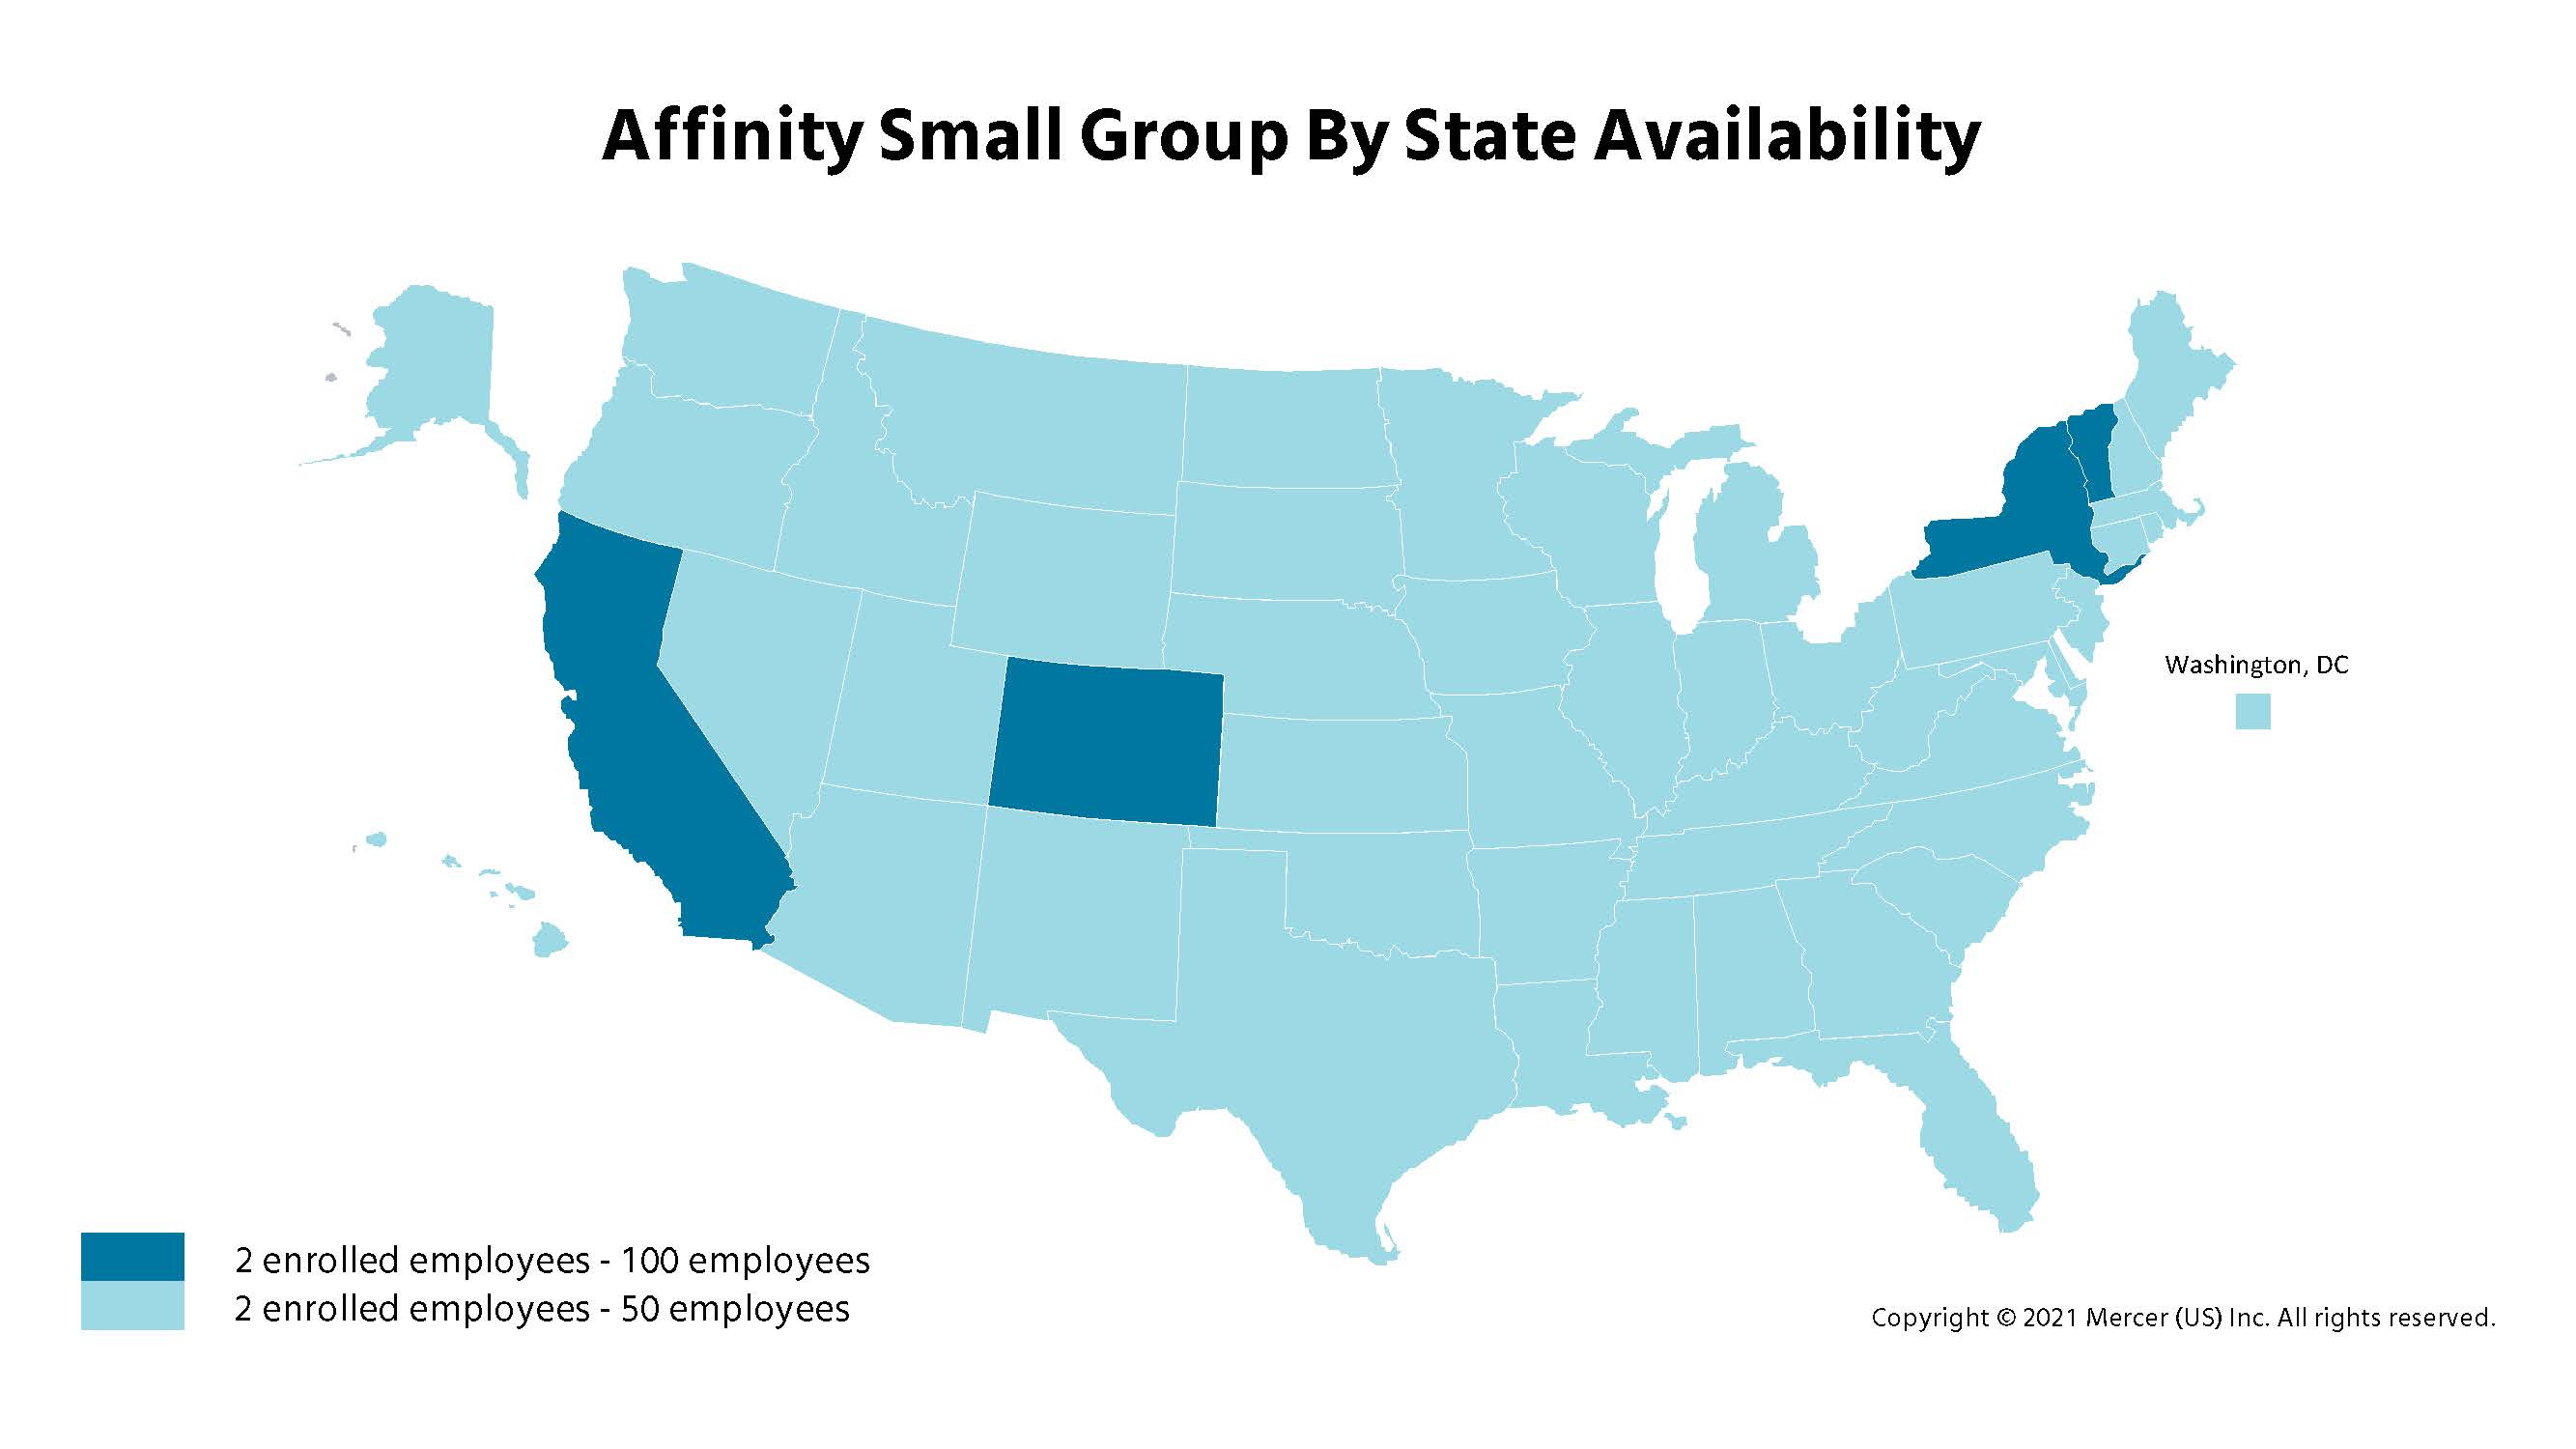 Affinity Small Group By State Availability